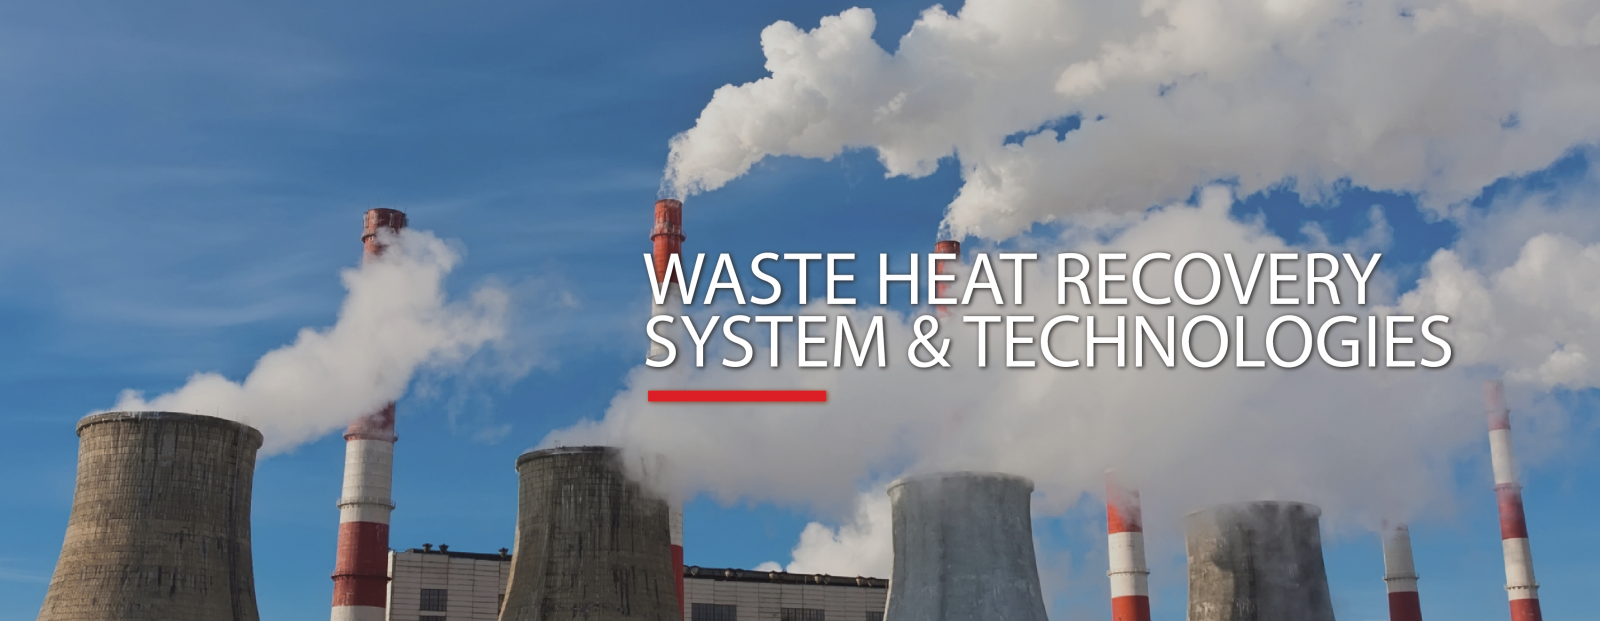 Banner for Waste Heat Recovery